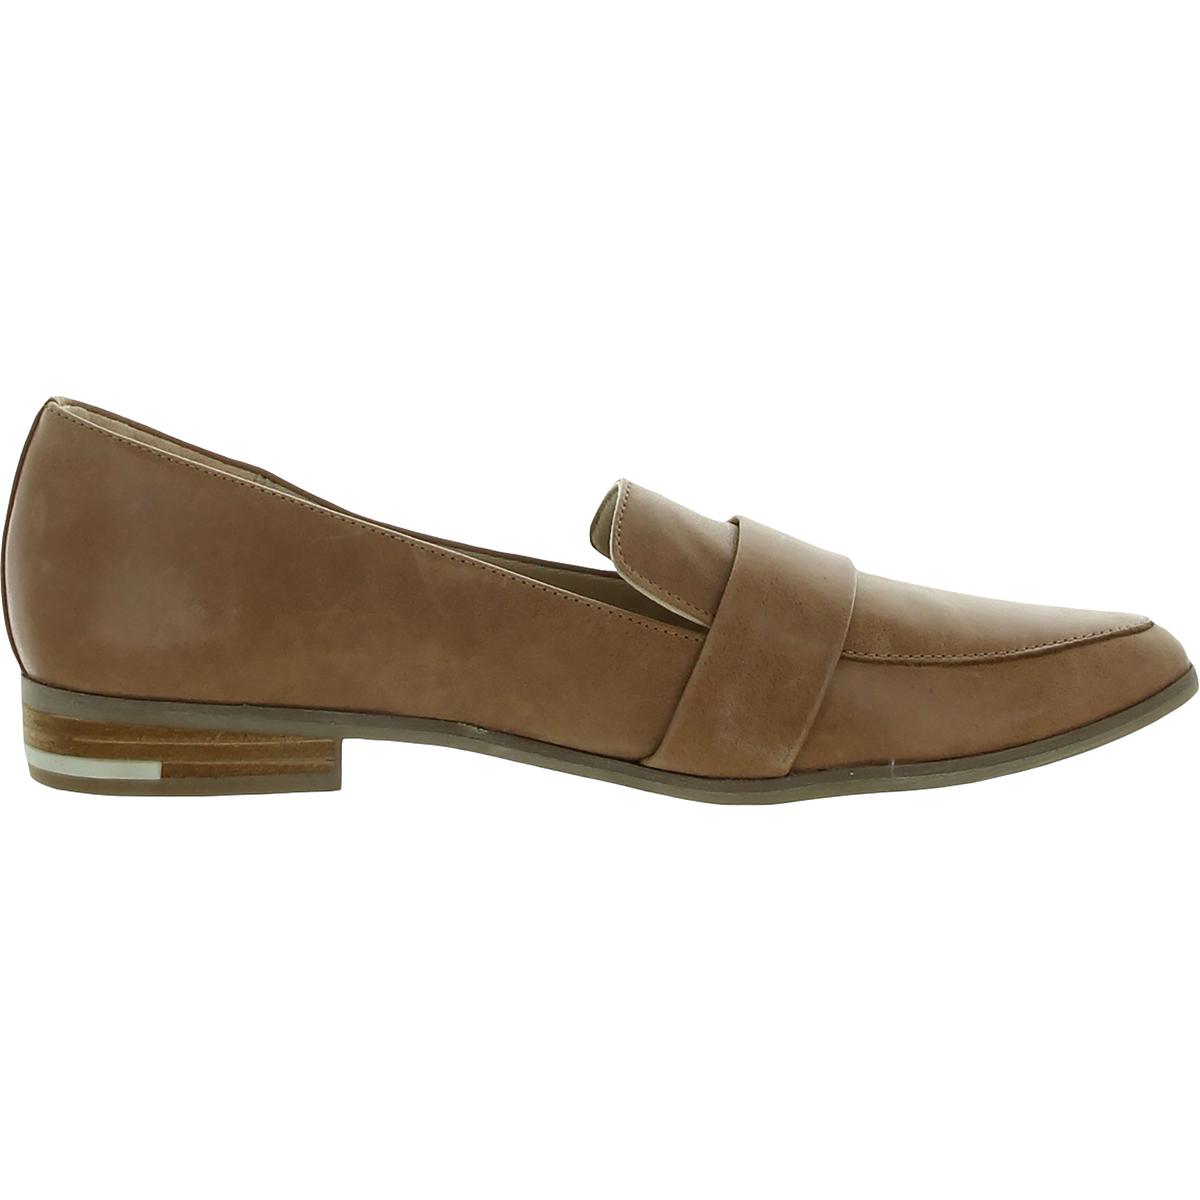 Dr. Scholl's Womens Faxon Leather Slip On Heeled Loafers Shoes BHFO ...